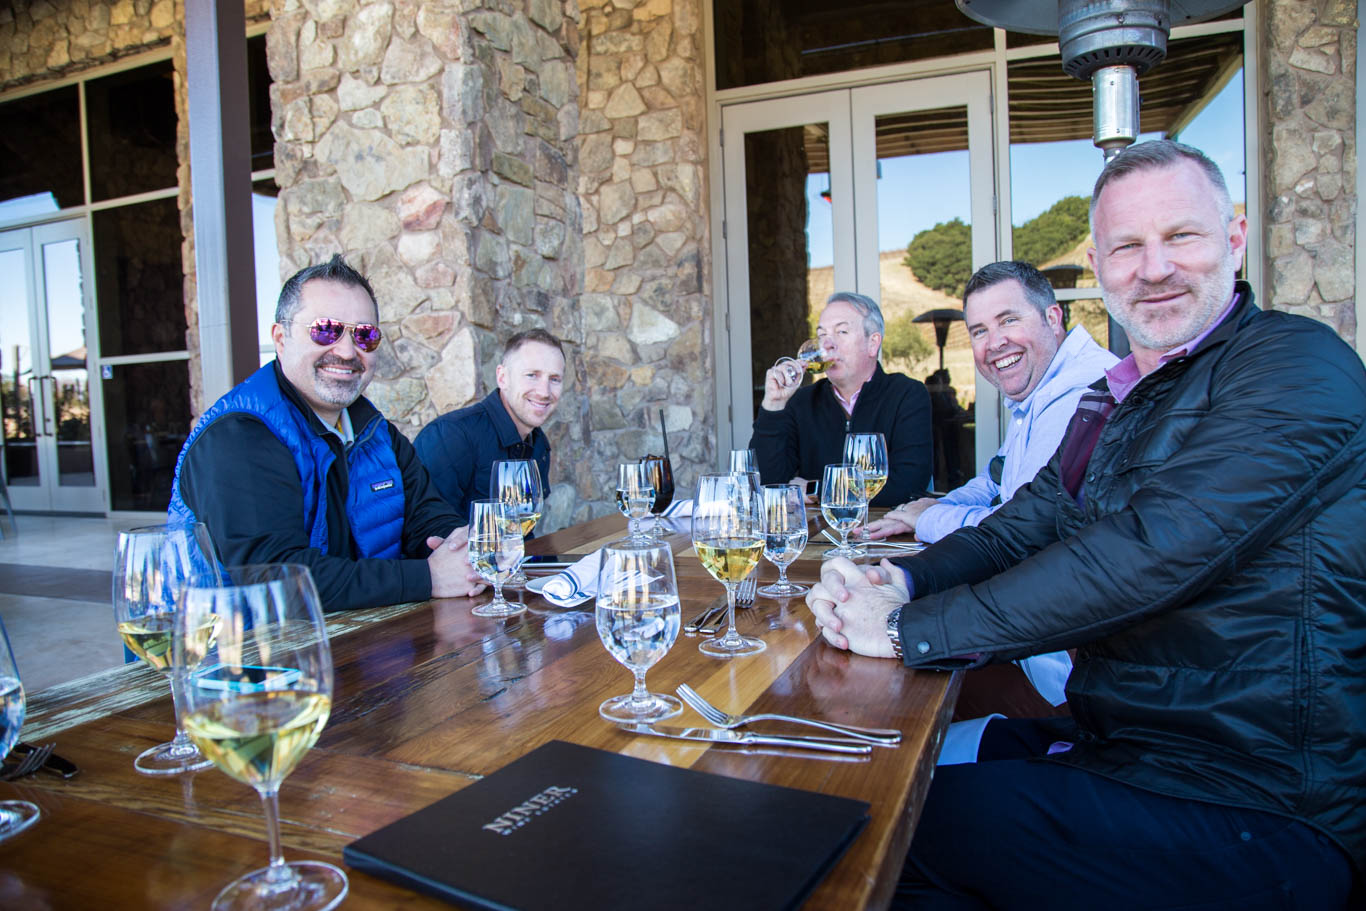 Group shot at lunch of the guys - Niner West - Wine tasting in Paso Robles 